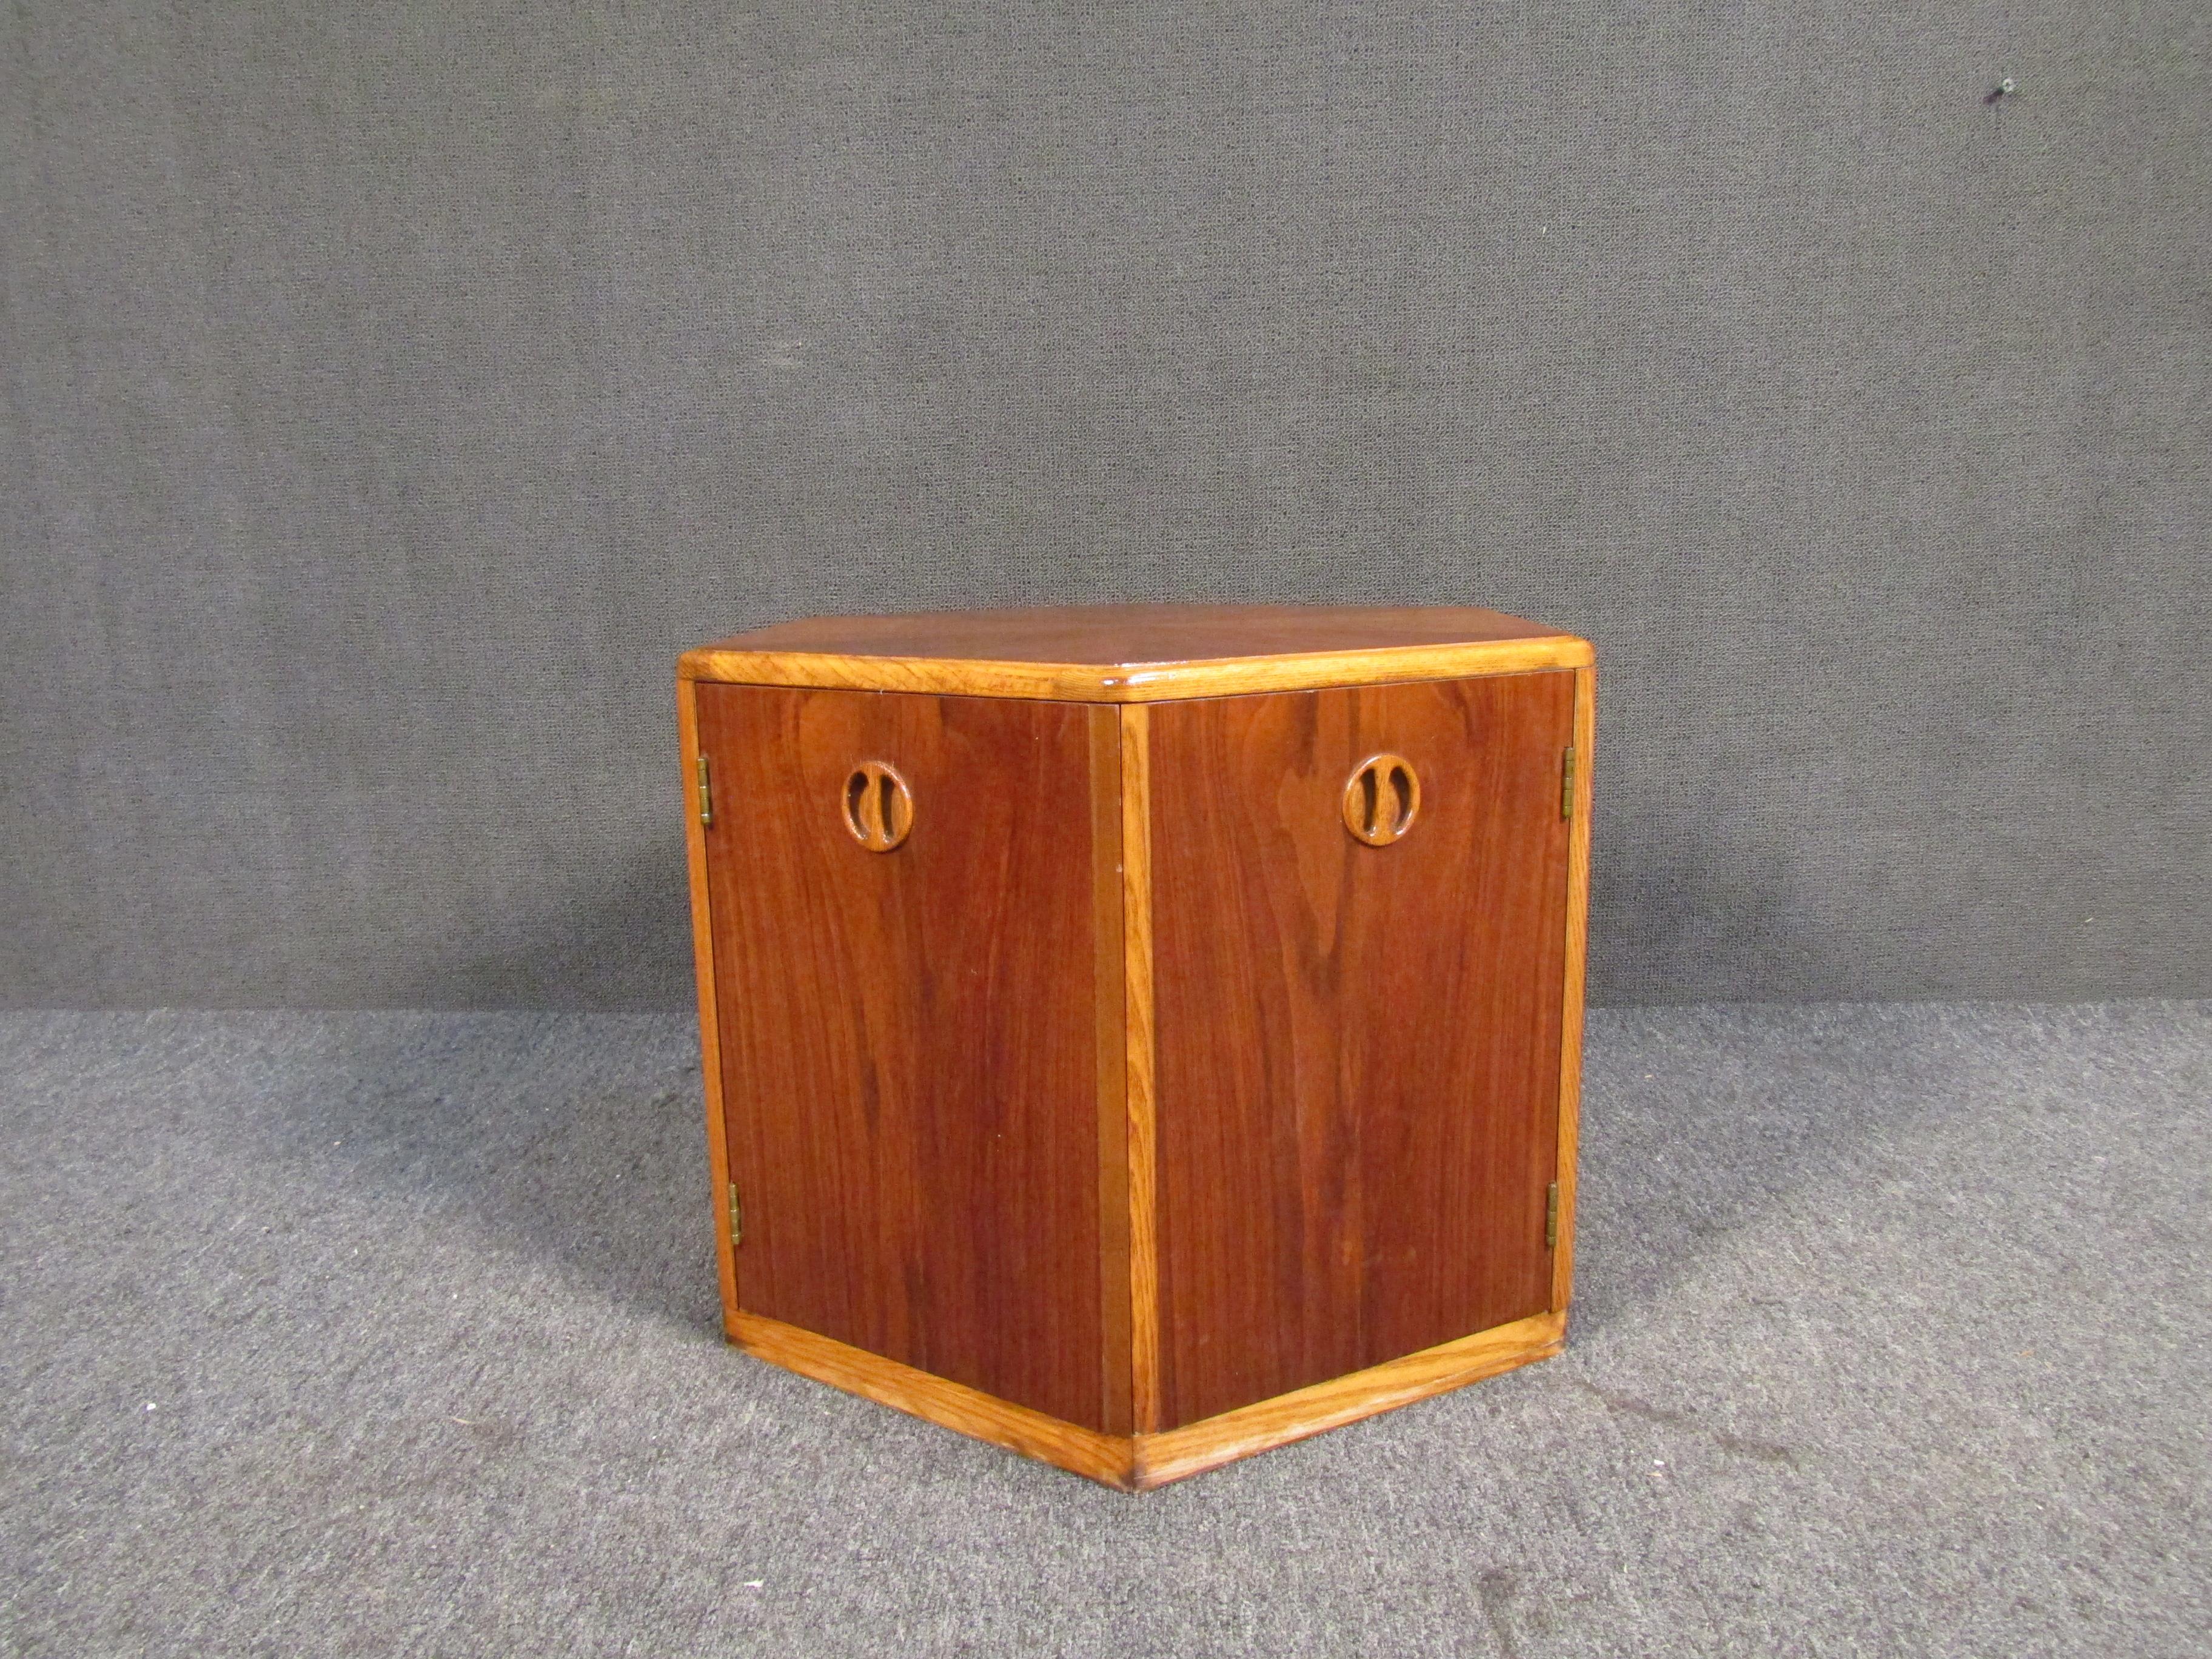 With a unique hexagonal design, contrasting woodgrain patterns on its top, sculpted door pulls, and generous storage inside, this vintage walnut side table is a Mid-Century Modern gem. Please confirm item location with seller (NY/NJ).